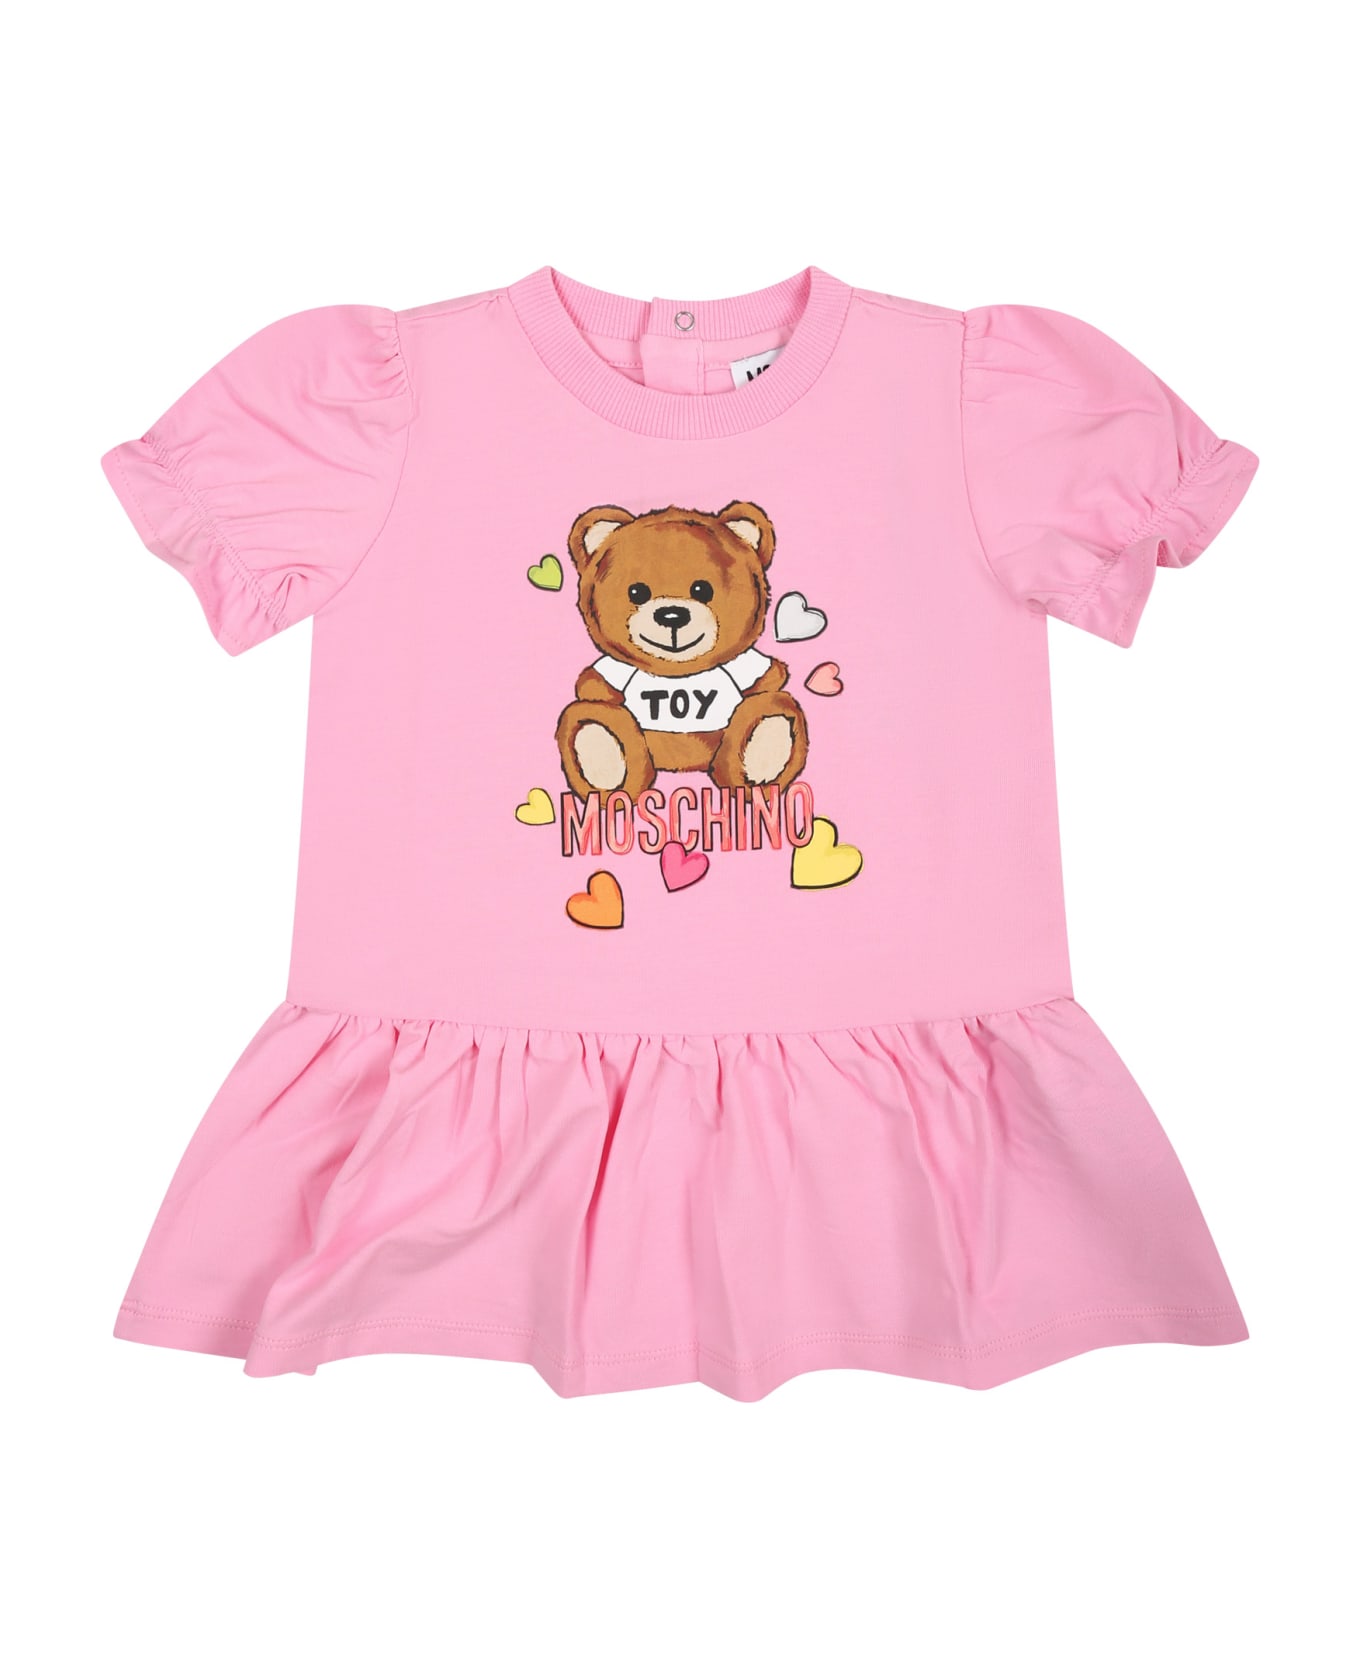 Moschino Pink Dress For Baby Girl With Teddy Bear Print - Pink ウェア